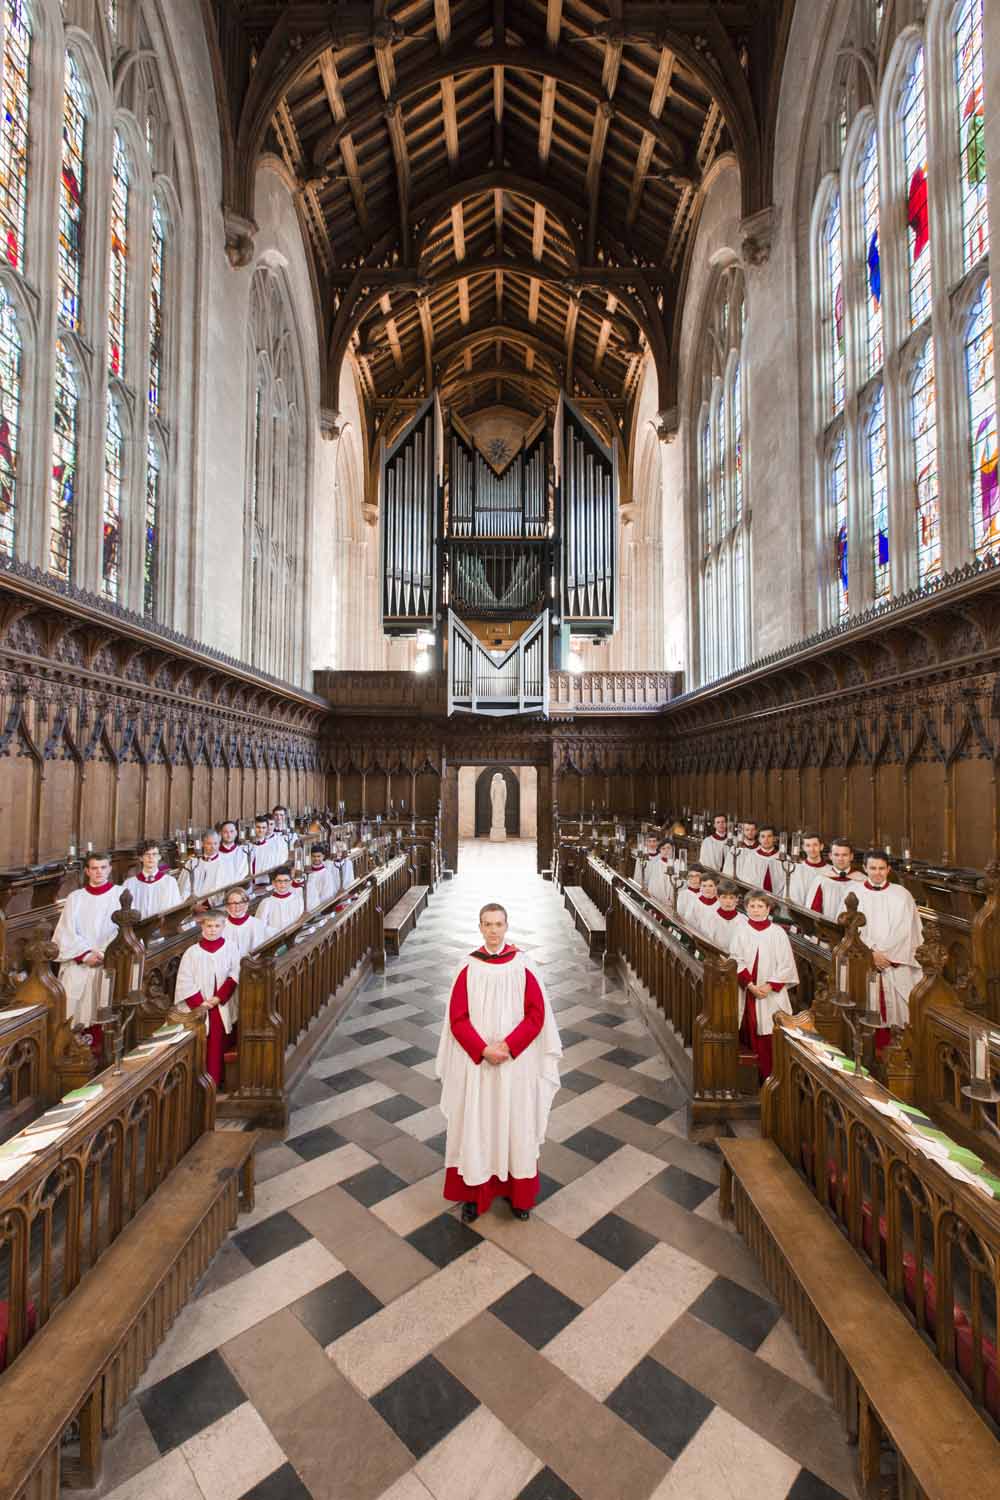 The choir in the Chapel